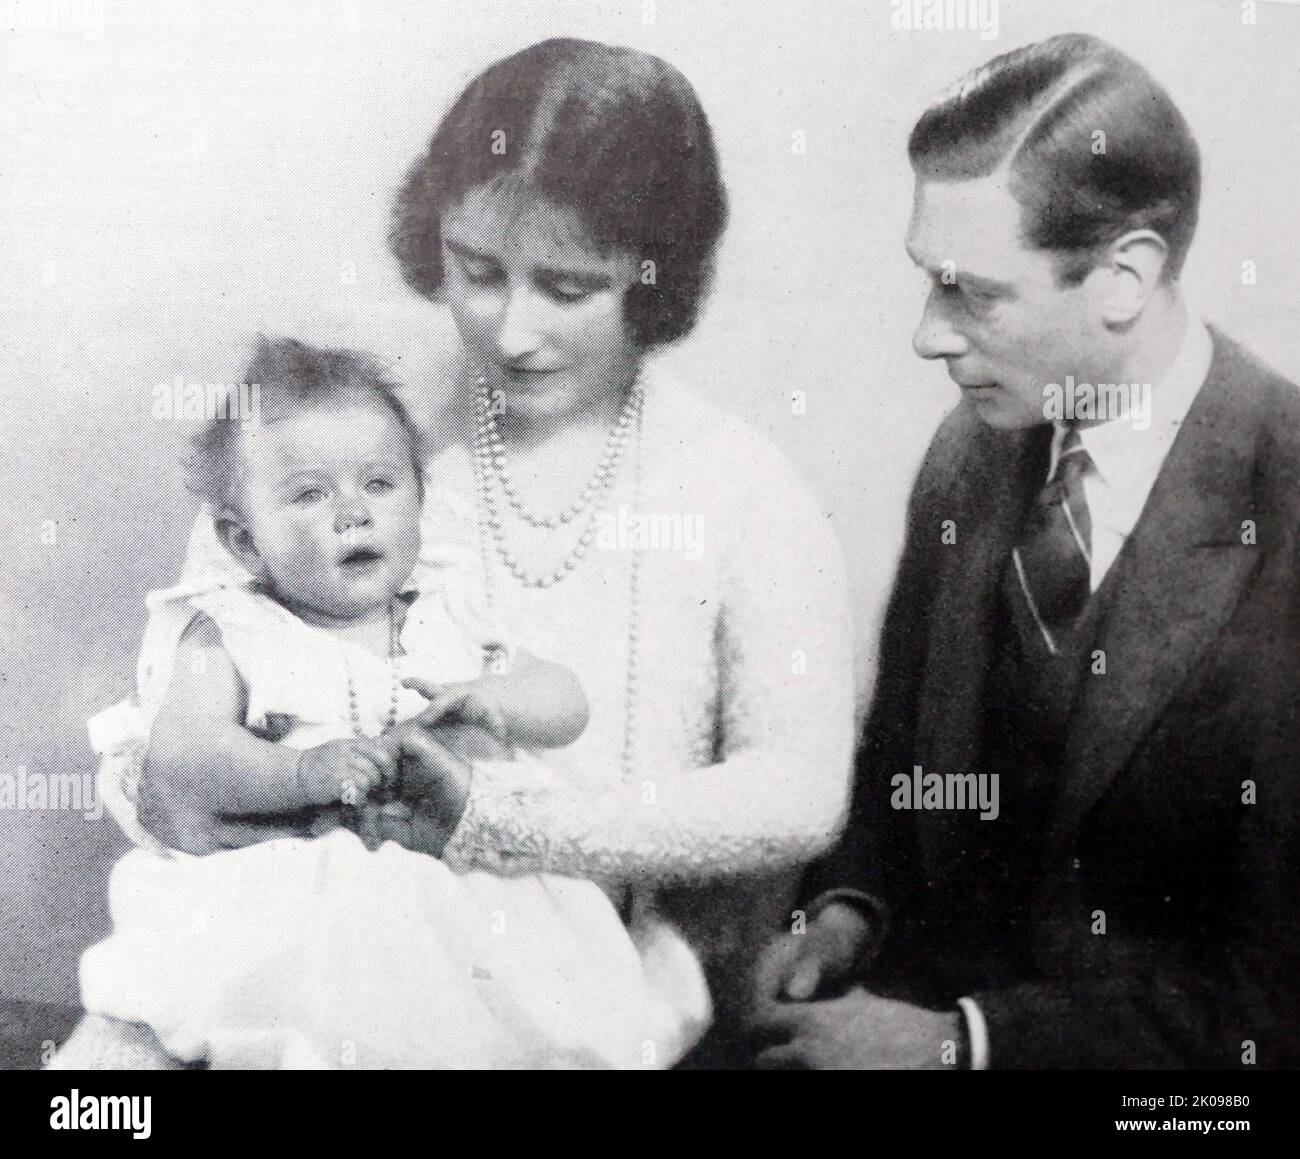 The Duke and Duchess of York with their daughter Elizabeth. Princess Elizabeth. Elizabeth II (Elizabeth Alexandra Mary; born 21 April 1926) is Queen of the United Kingdom and 15 other Commonwealth realms. She is the elder daughter of King George VI and Queen Elizabeth. Stock Photo